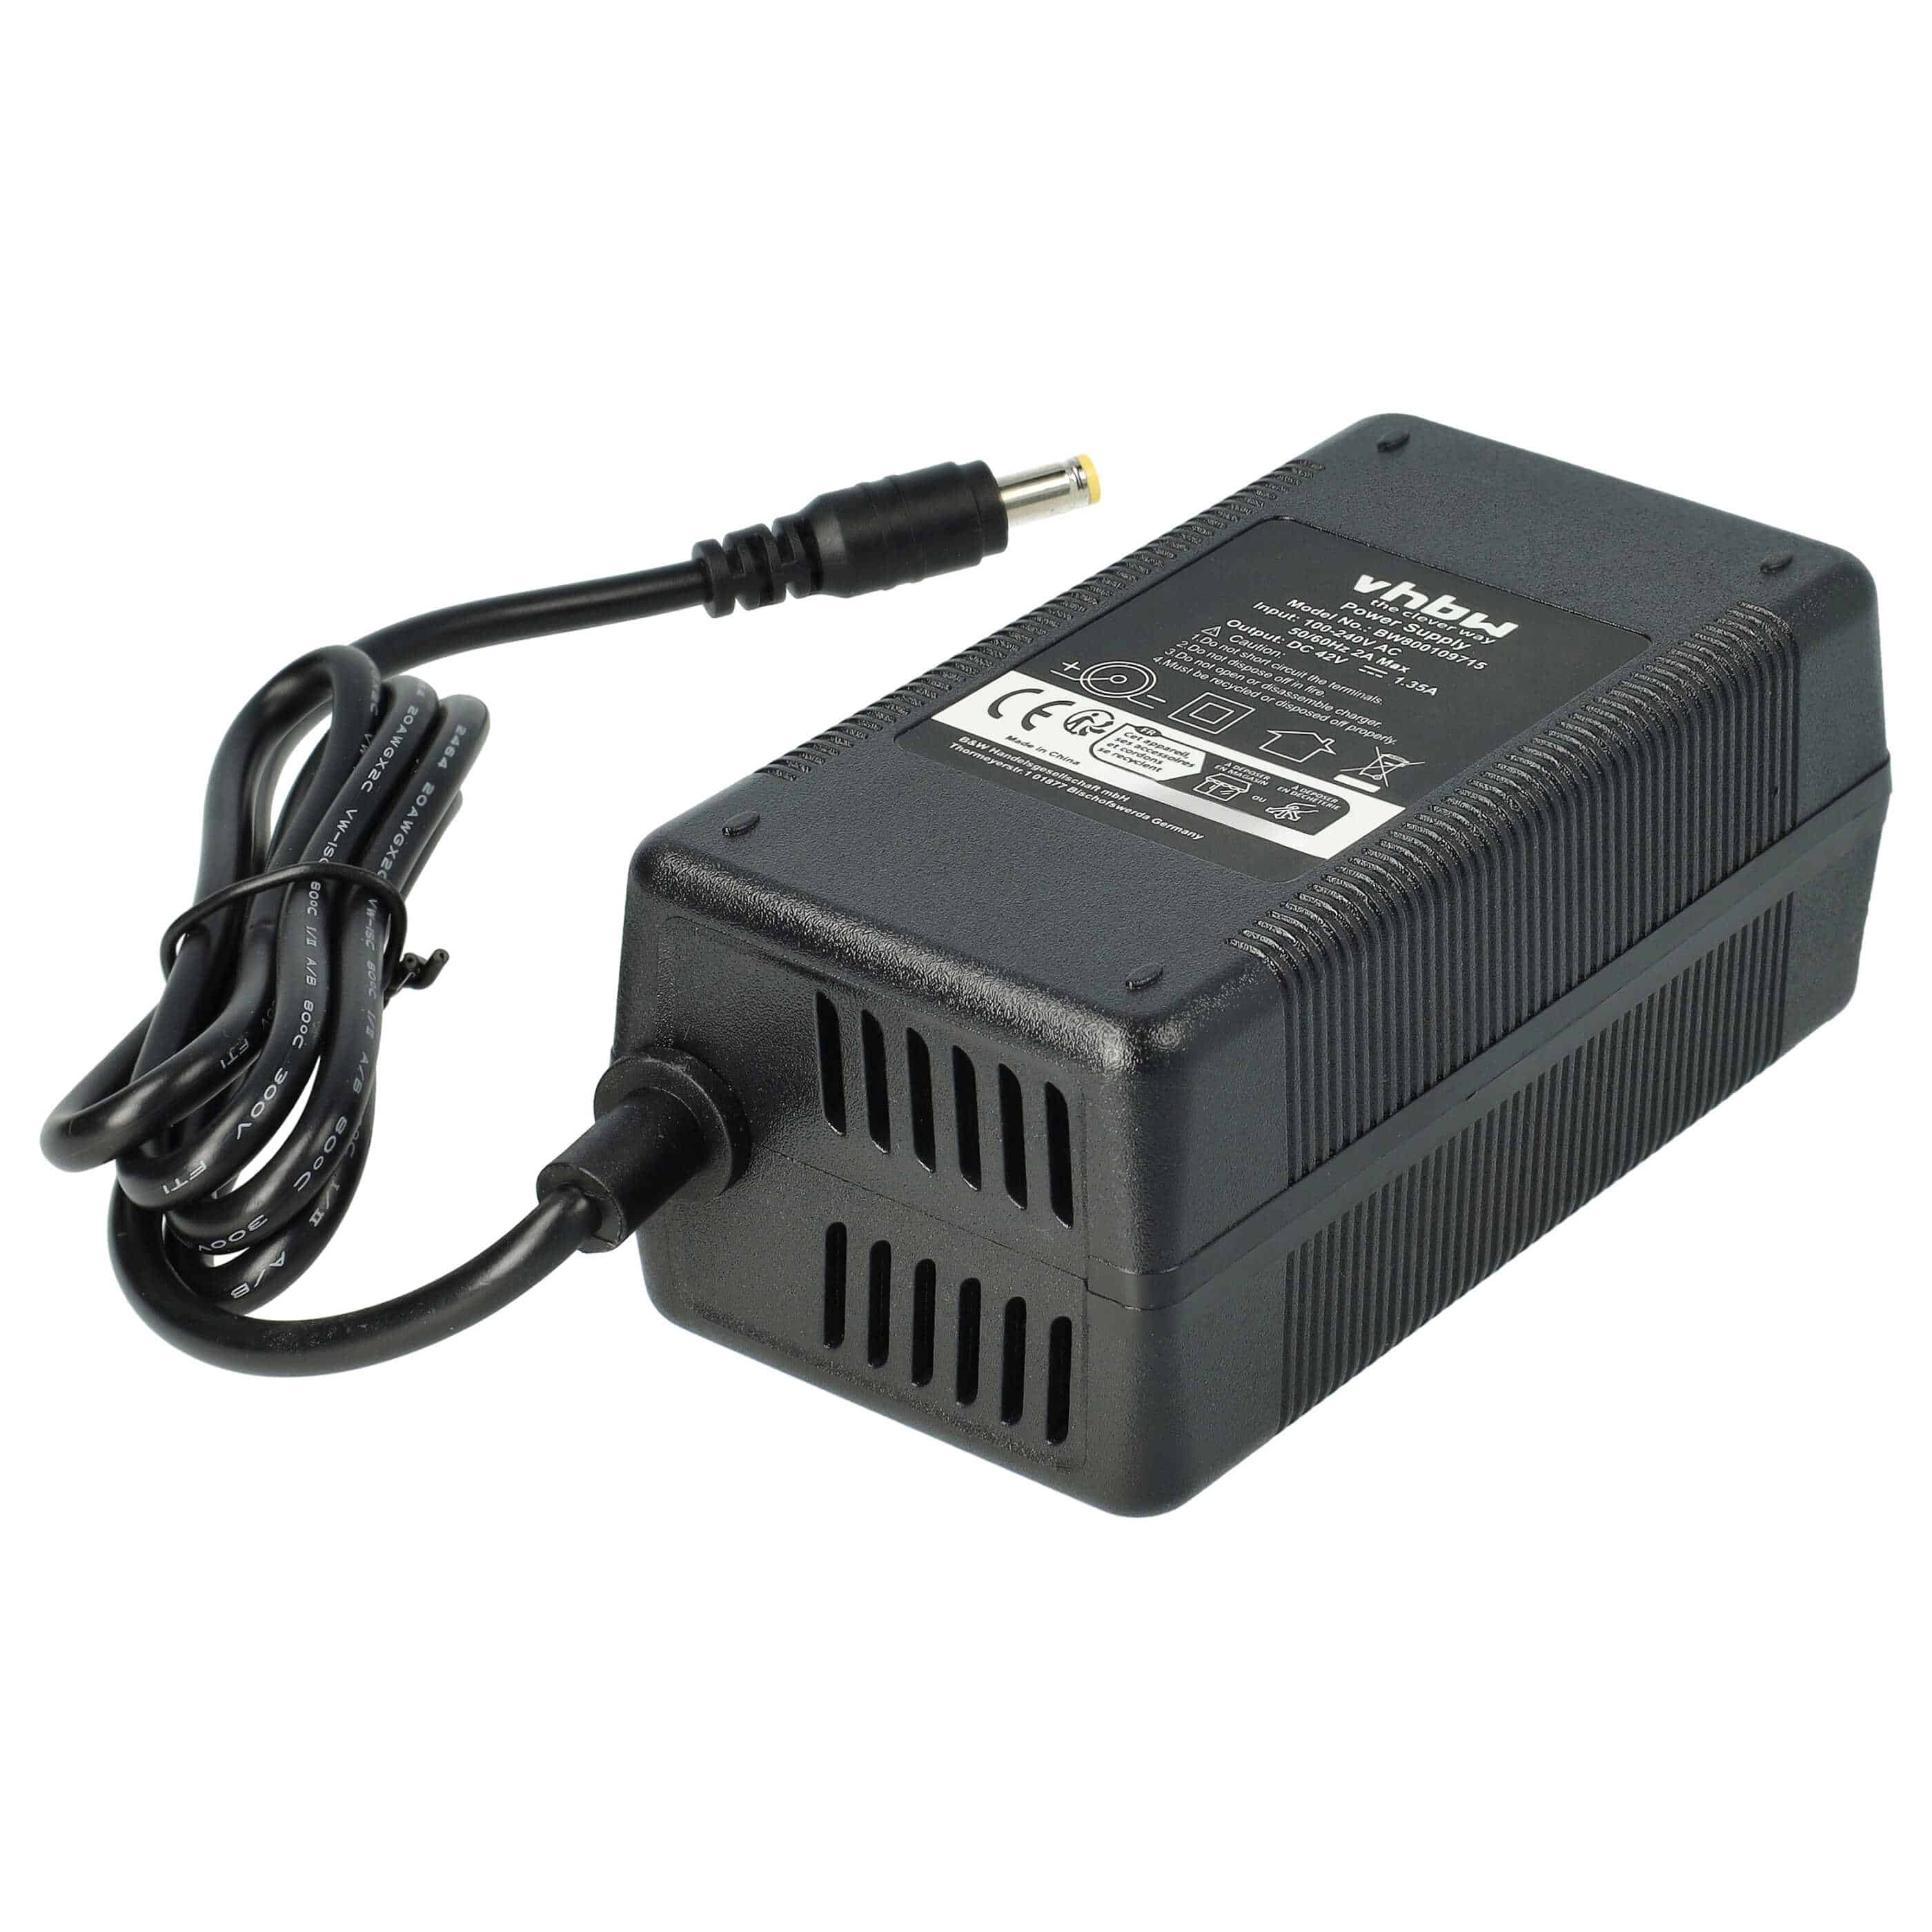 Charger replaces ACK4201 for Li-Ion E-Bike Battery etc. - For 36 V Batteries, With Round Plug, 1.35 A